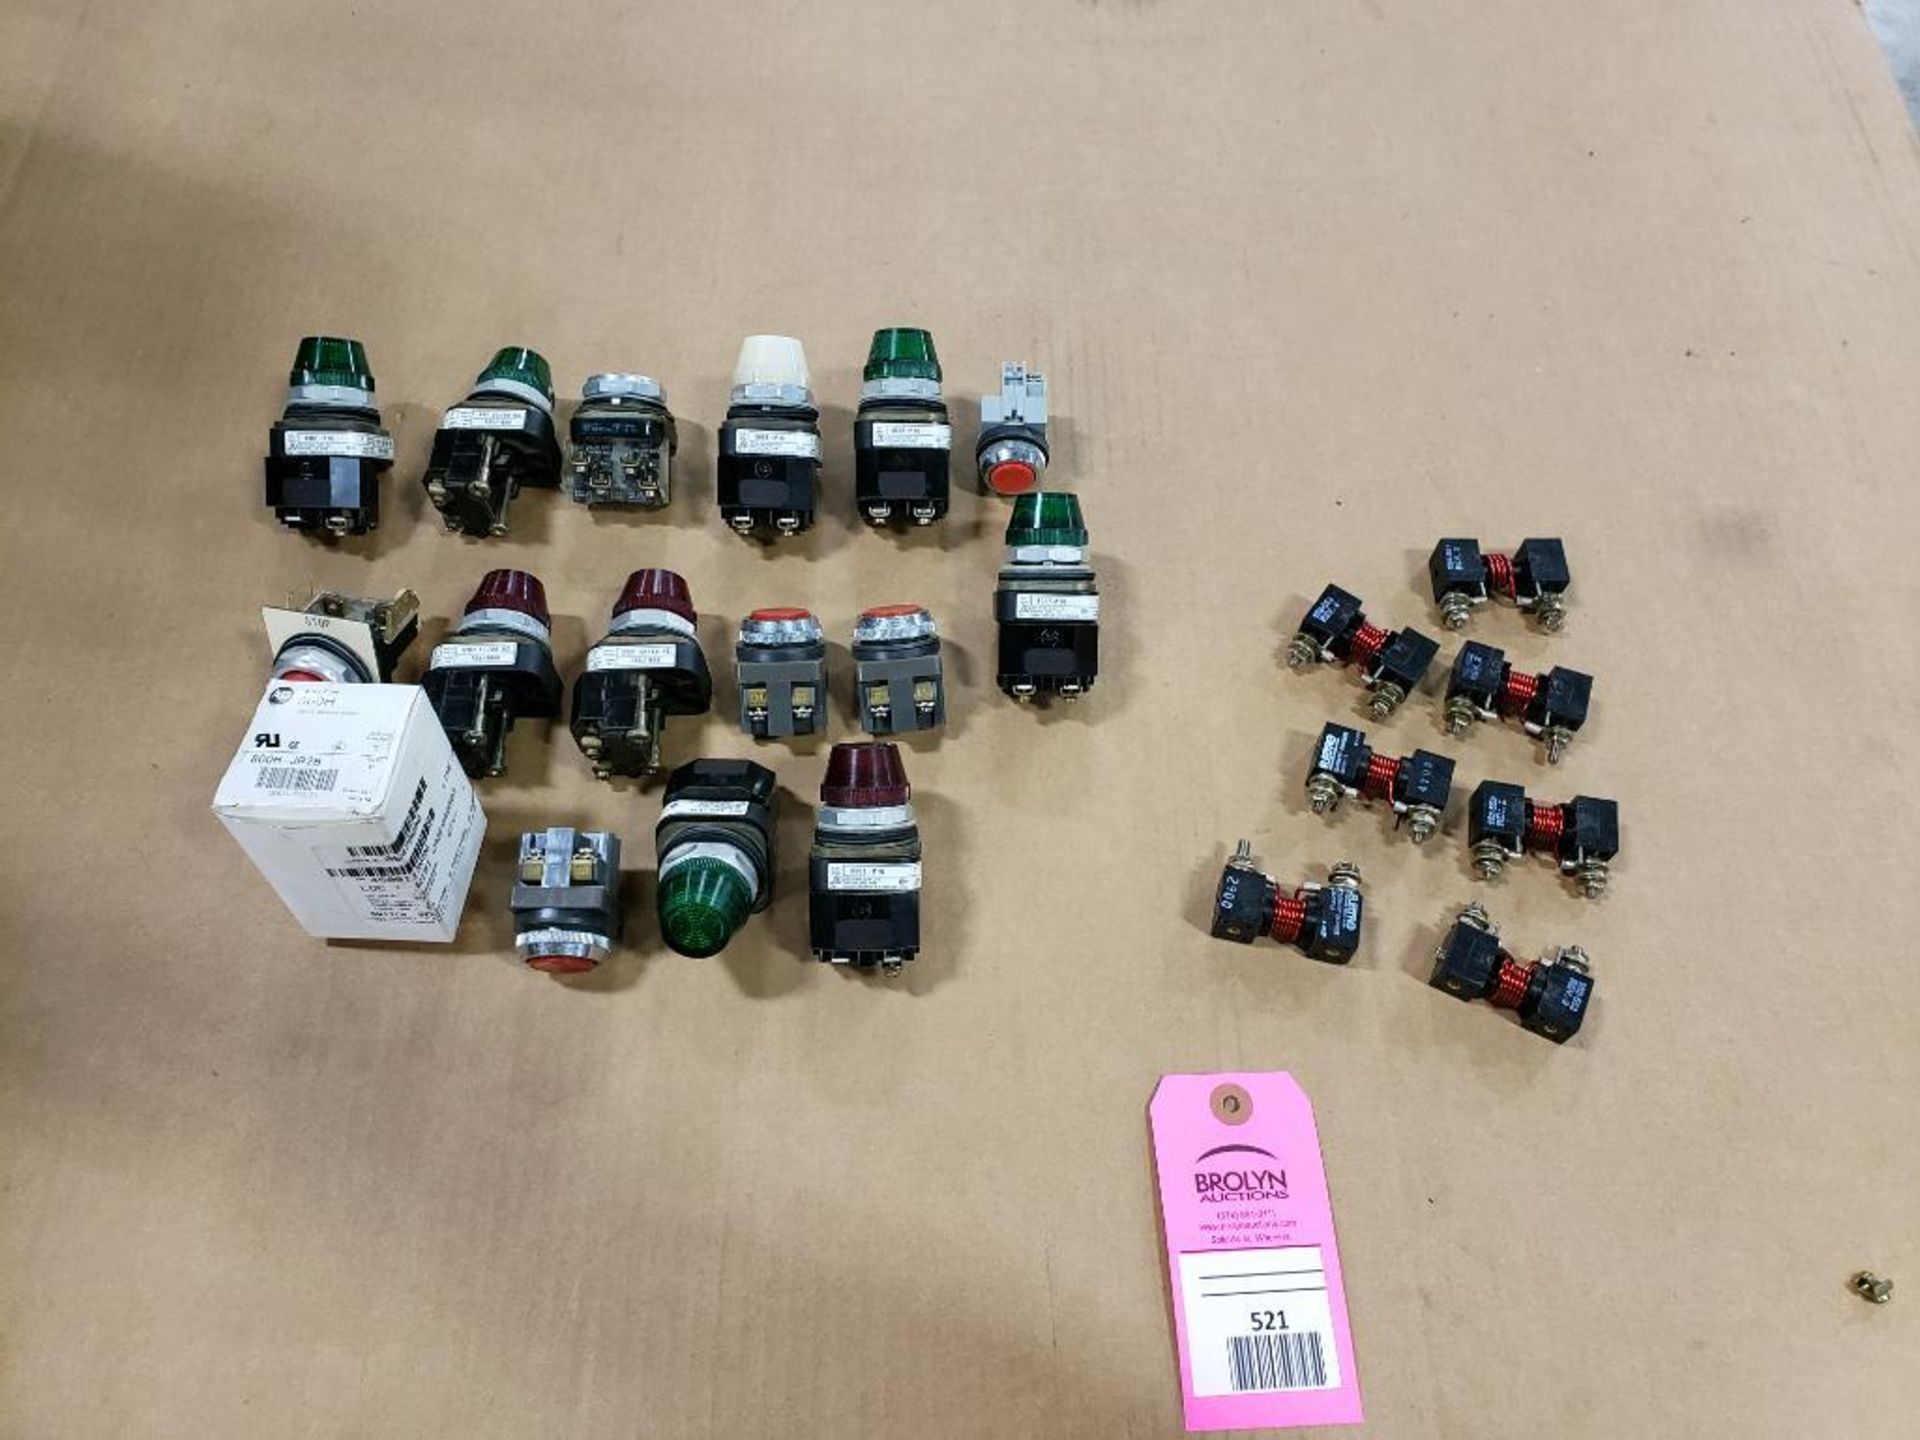 Assorted electrical buttons and relays.